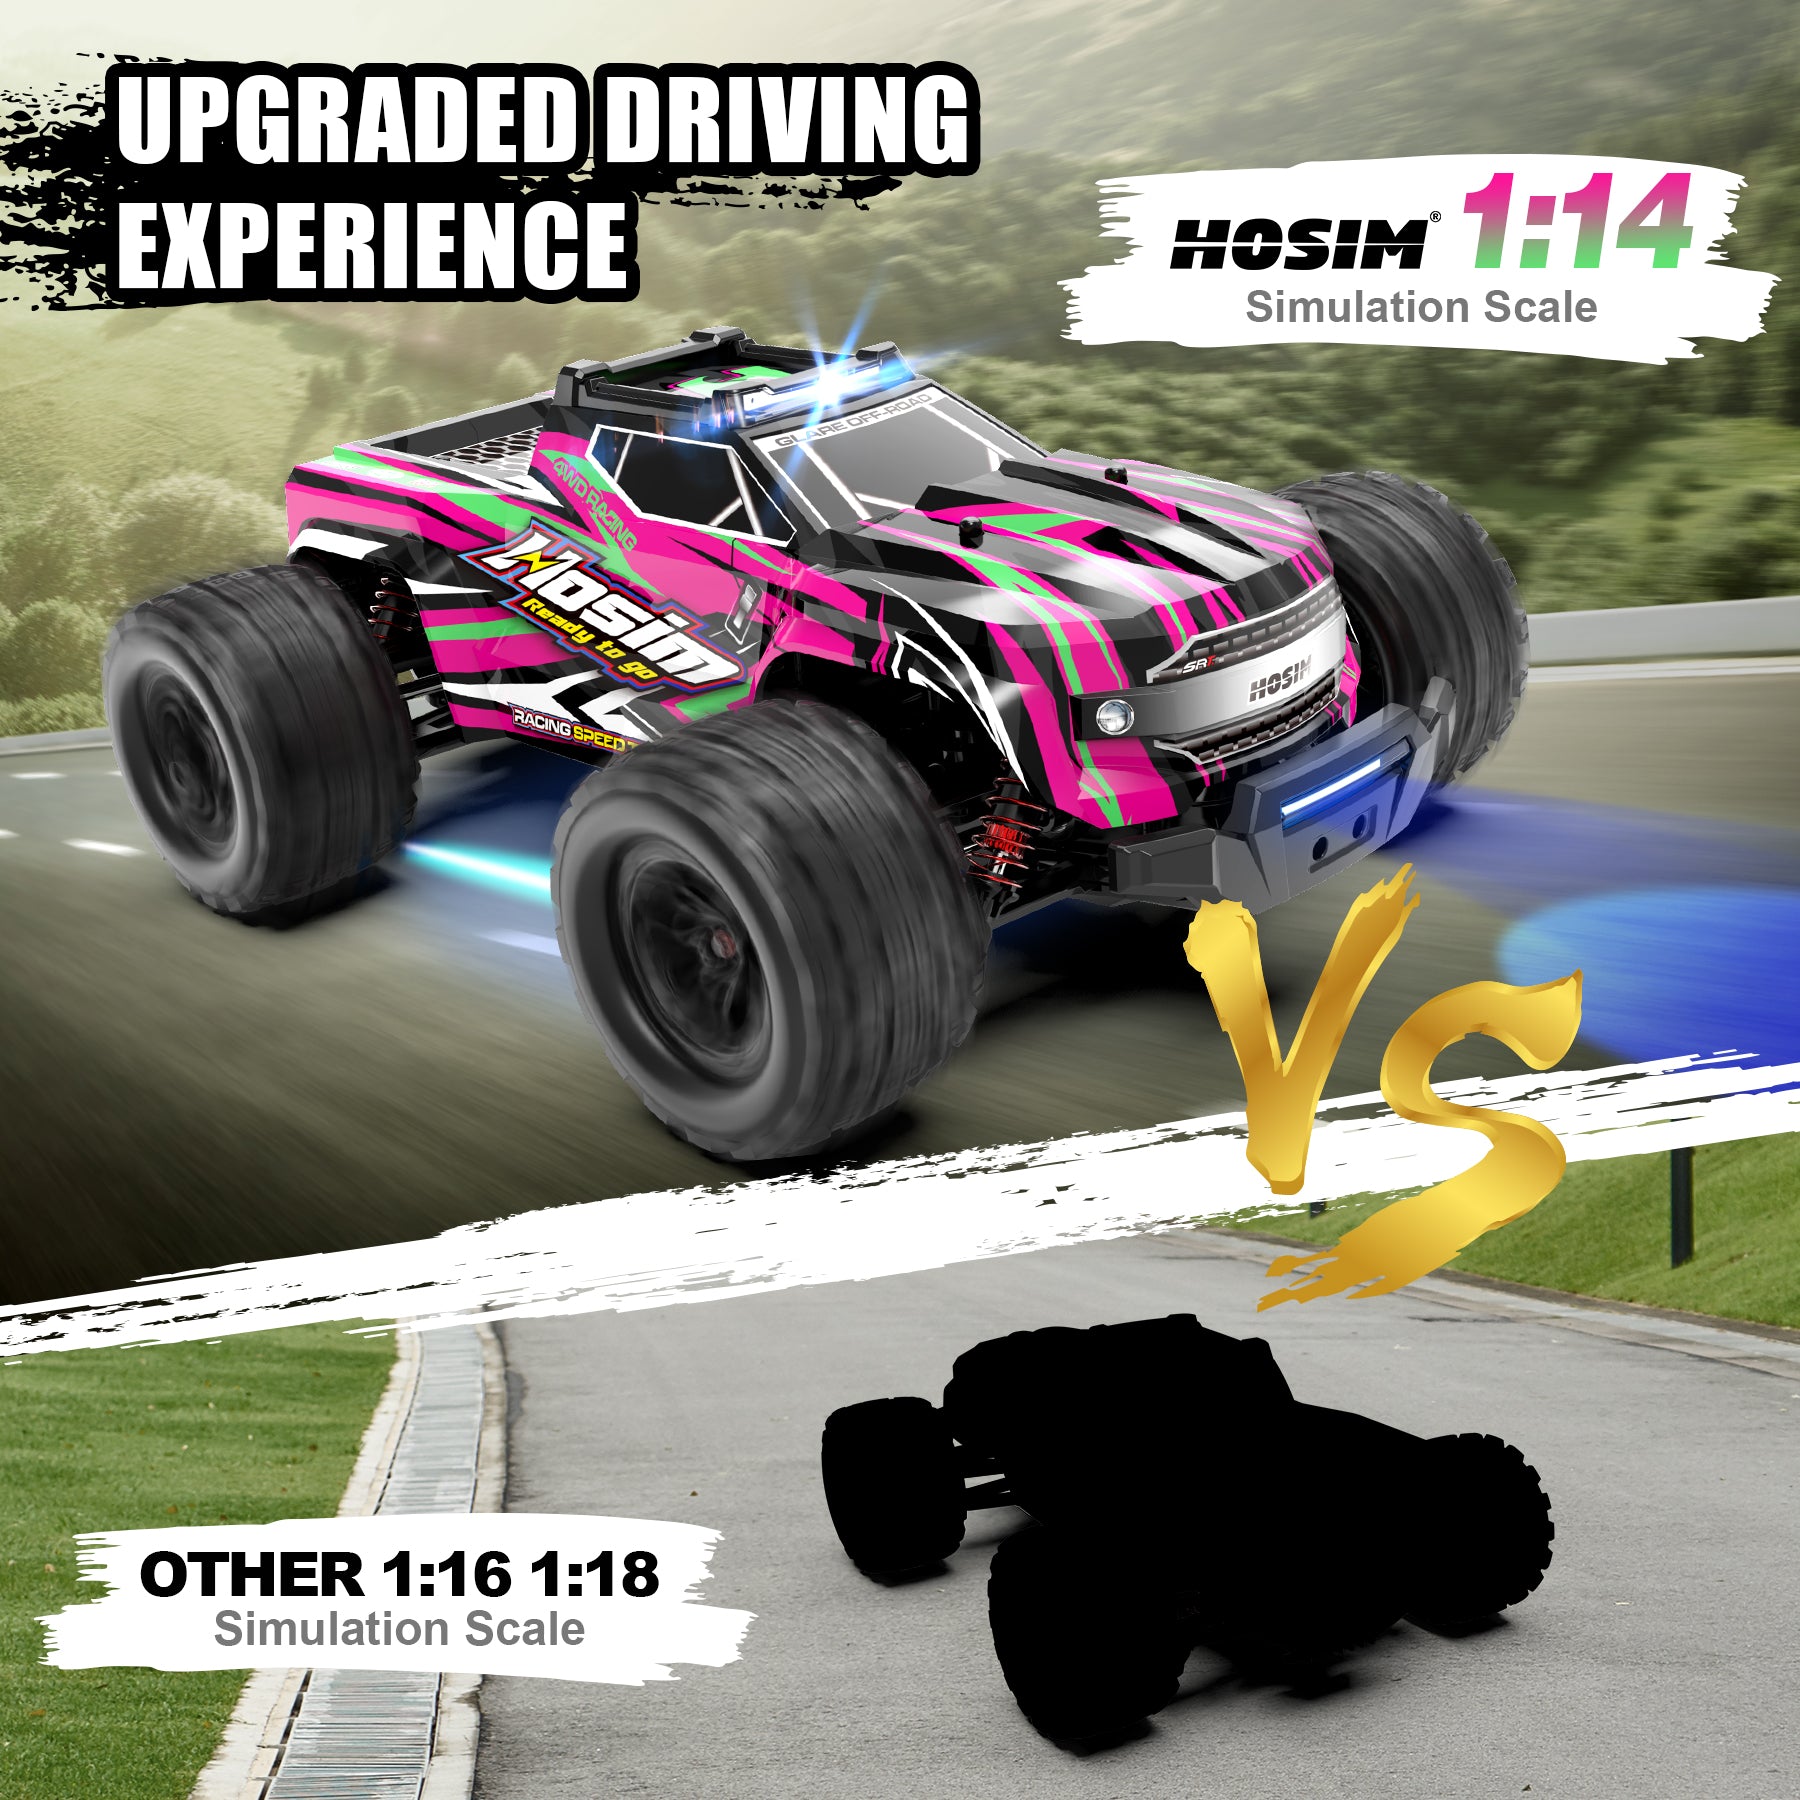 Hosim 1:14 RC Cars for Adults,40+ KPH Fast High Speed Hobby Electric 4X4 Off-Road Jumping Remote Control RC Trucks